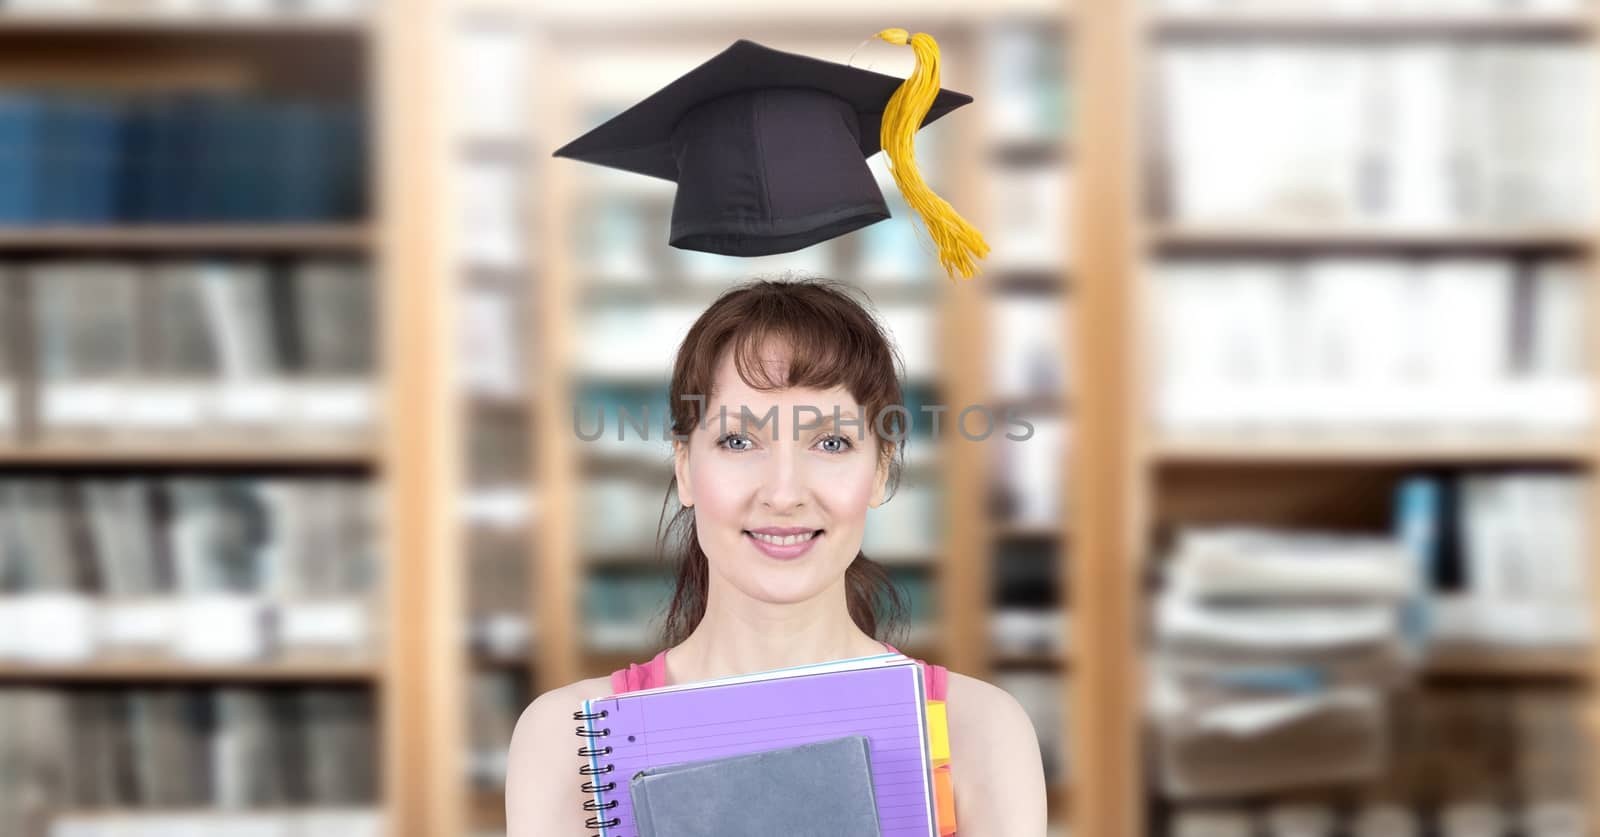 Student mature woman in education library with graduation hat by Wavebreakmedia